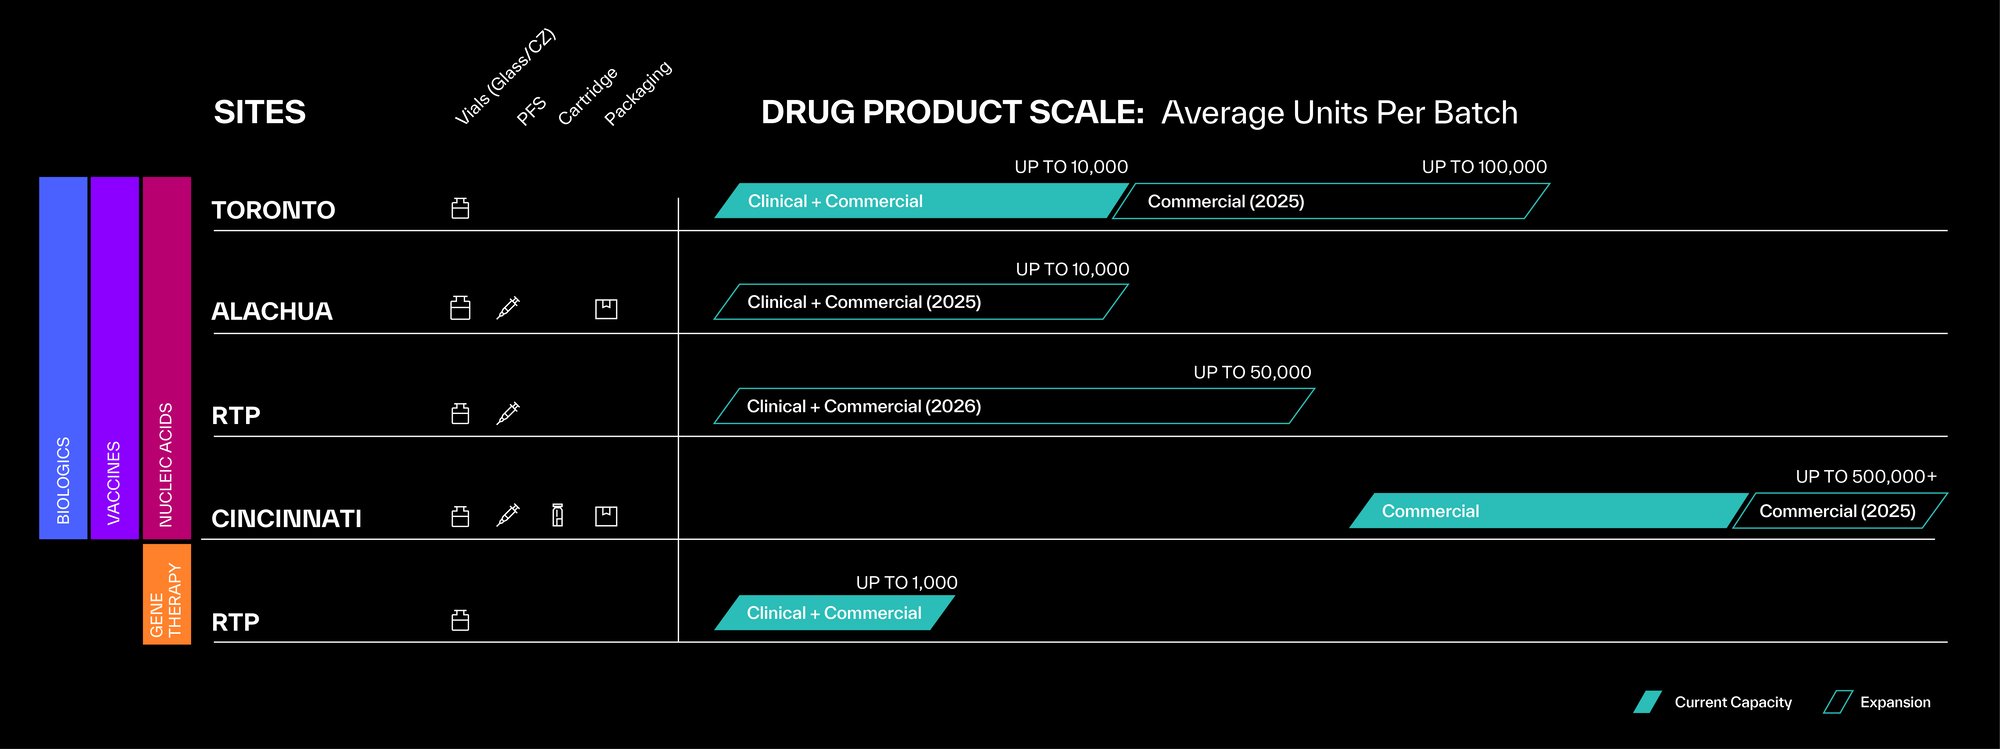 Drug Product Scale 062524-02 (1)